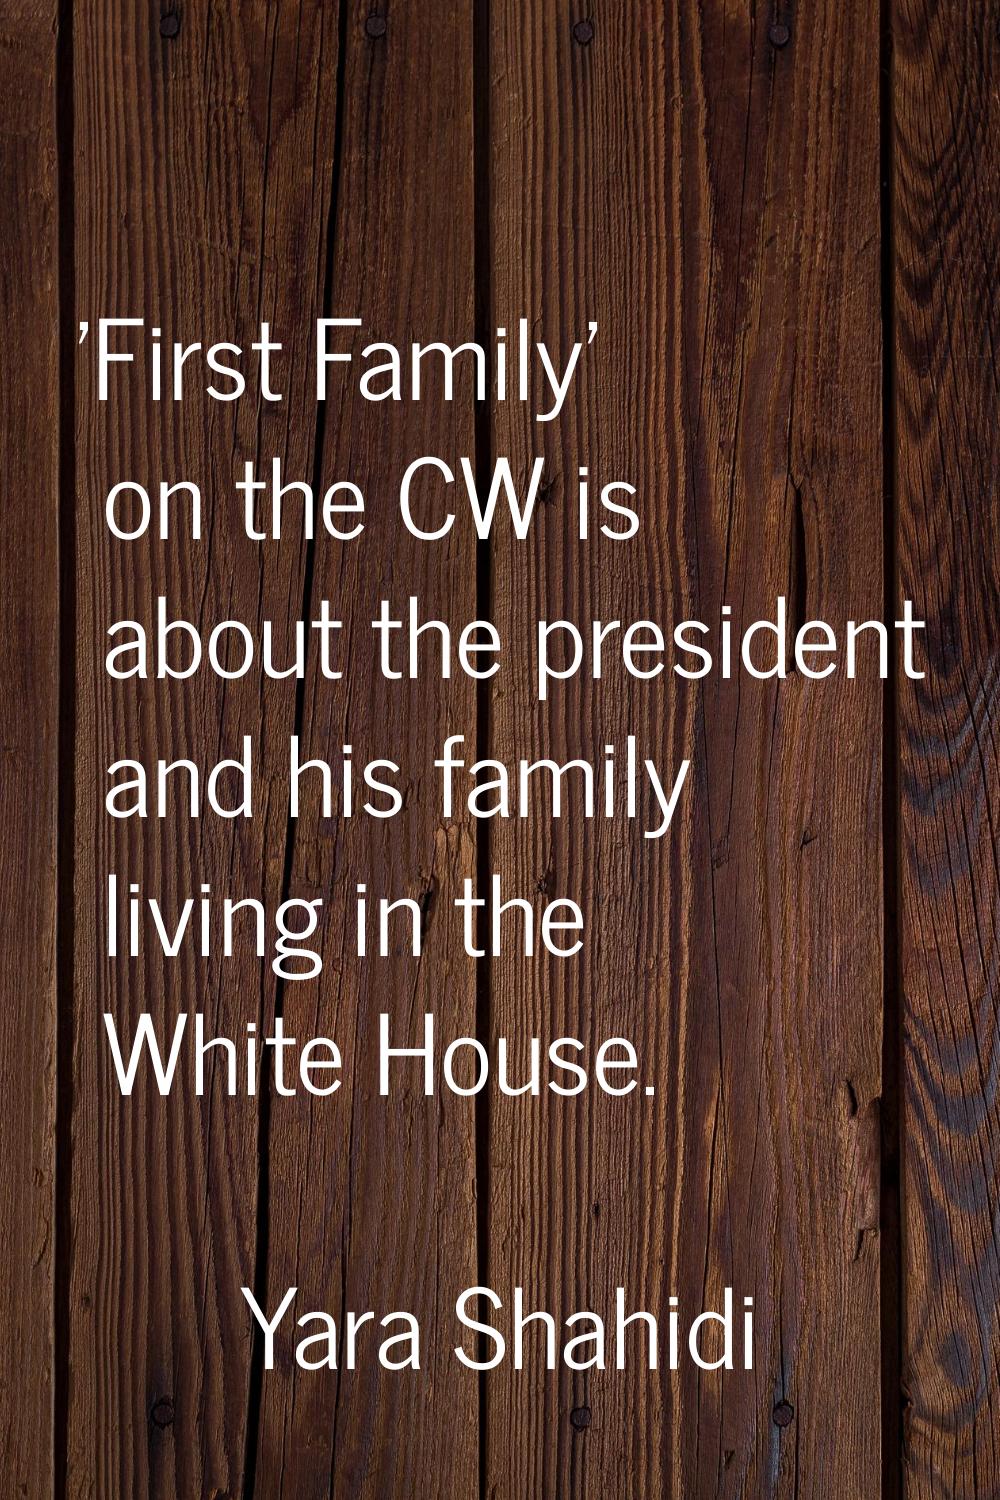 'First Family' on the CW is about the president and his family living in the White House.